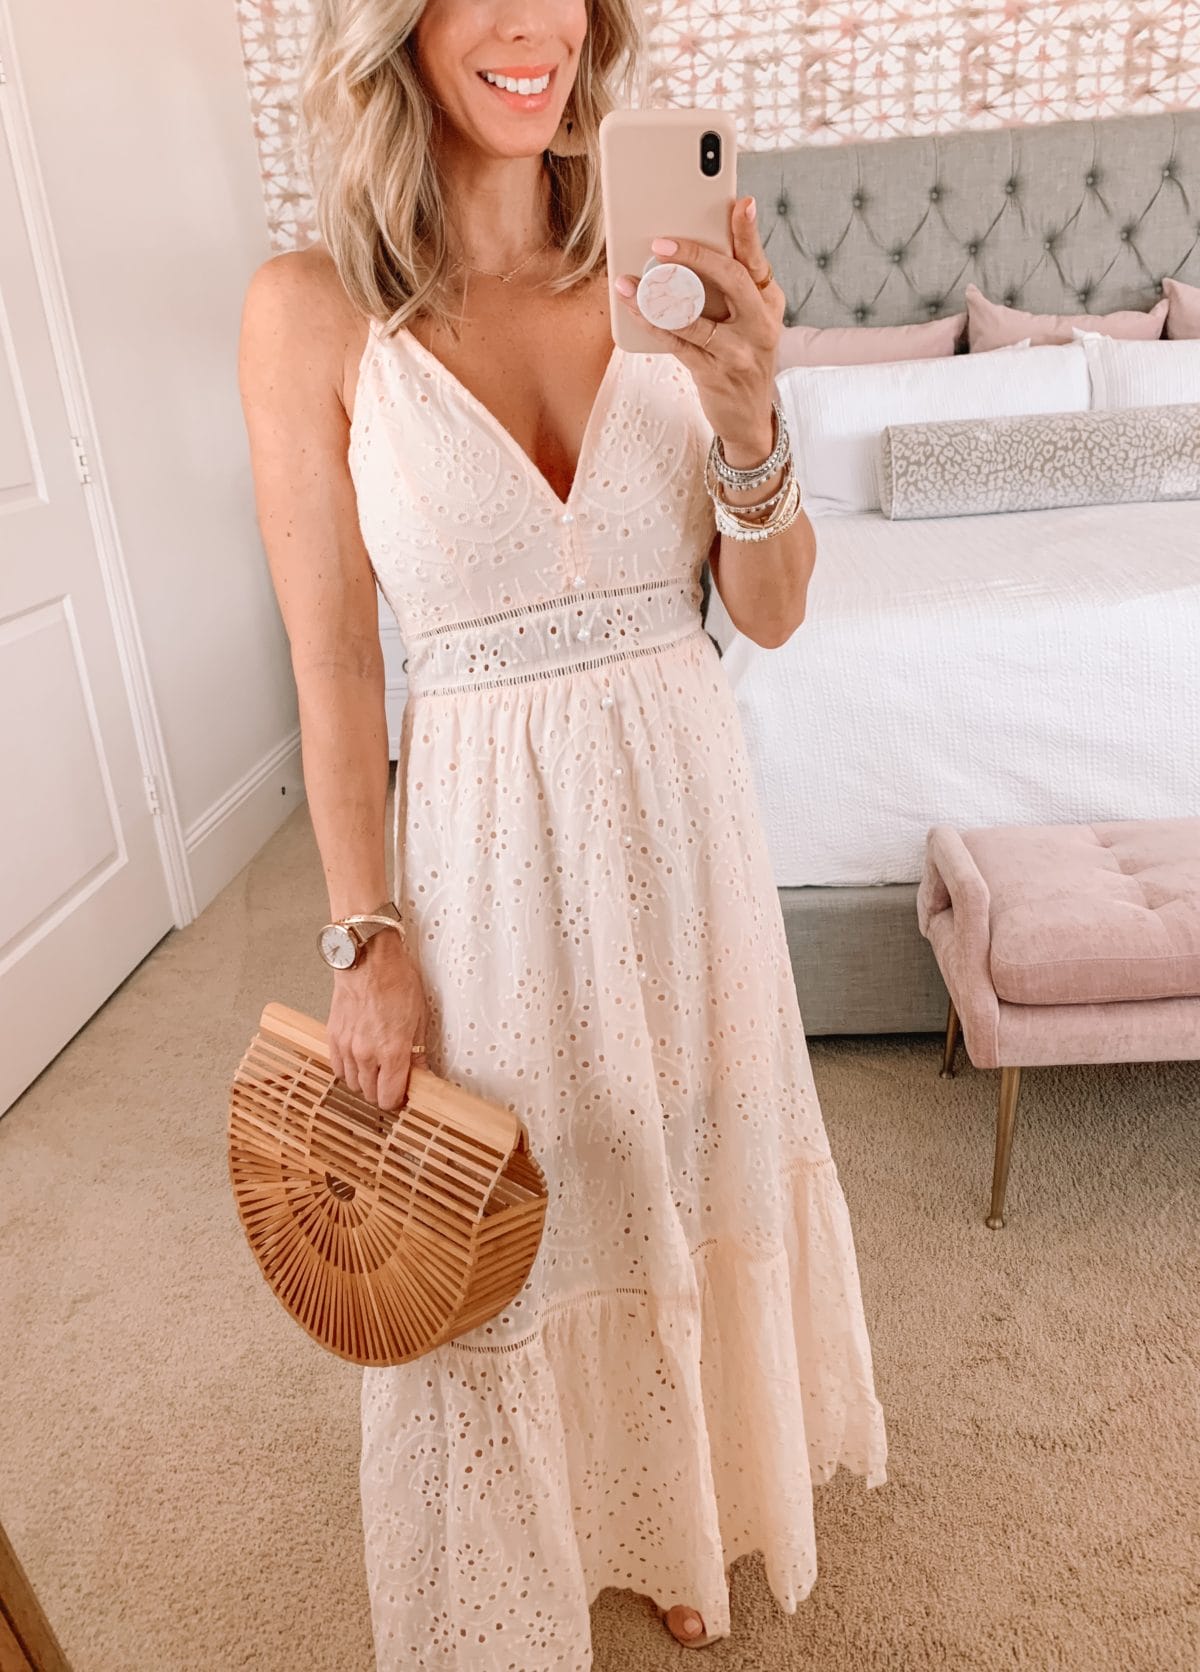 Amazon Fashion Faves, Pink Eyelet Maxi Dress, Bamboo Clutch and Sandals